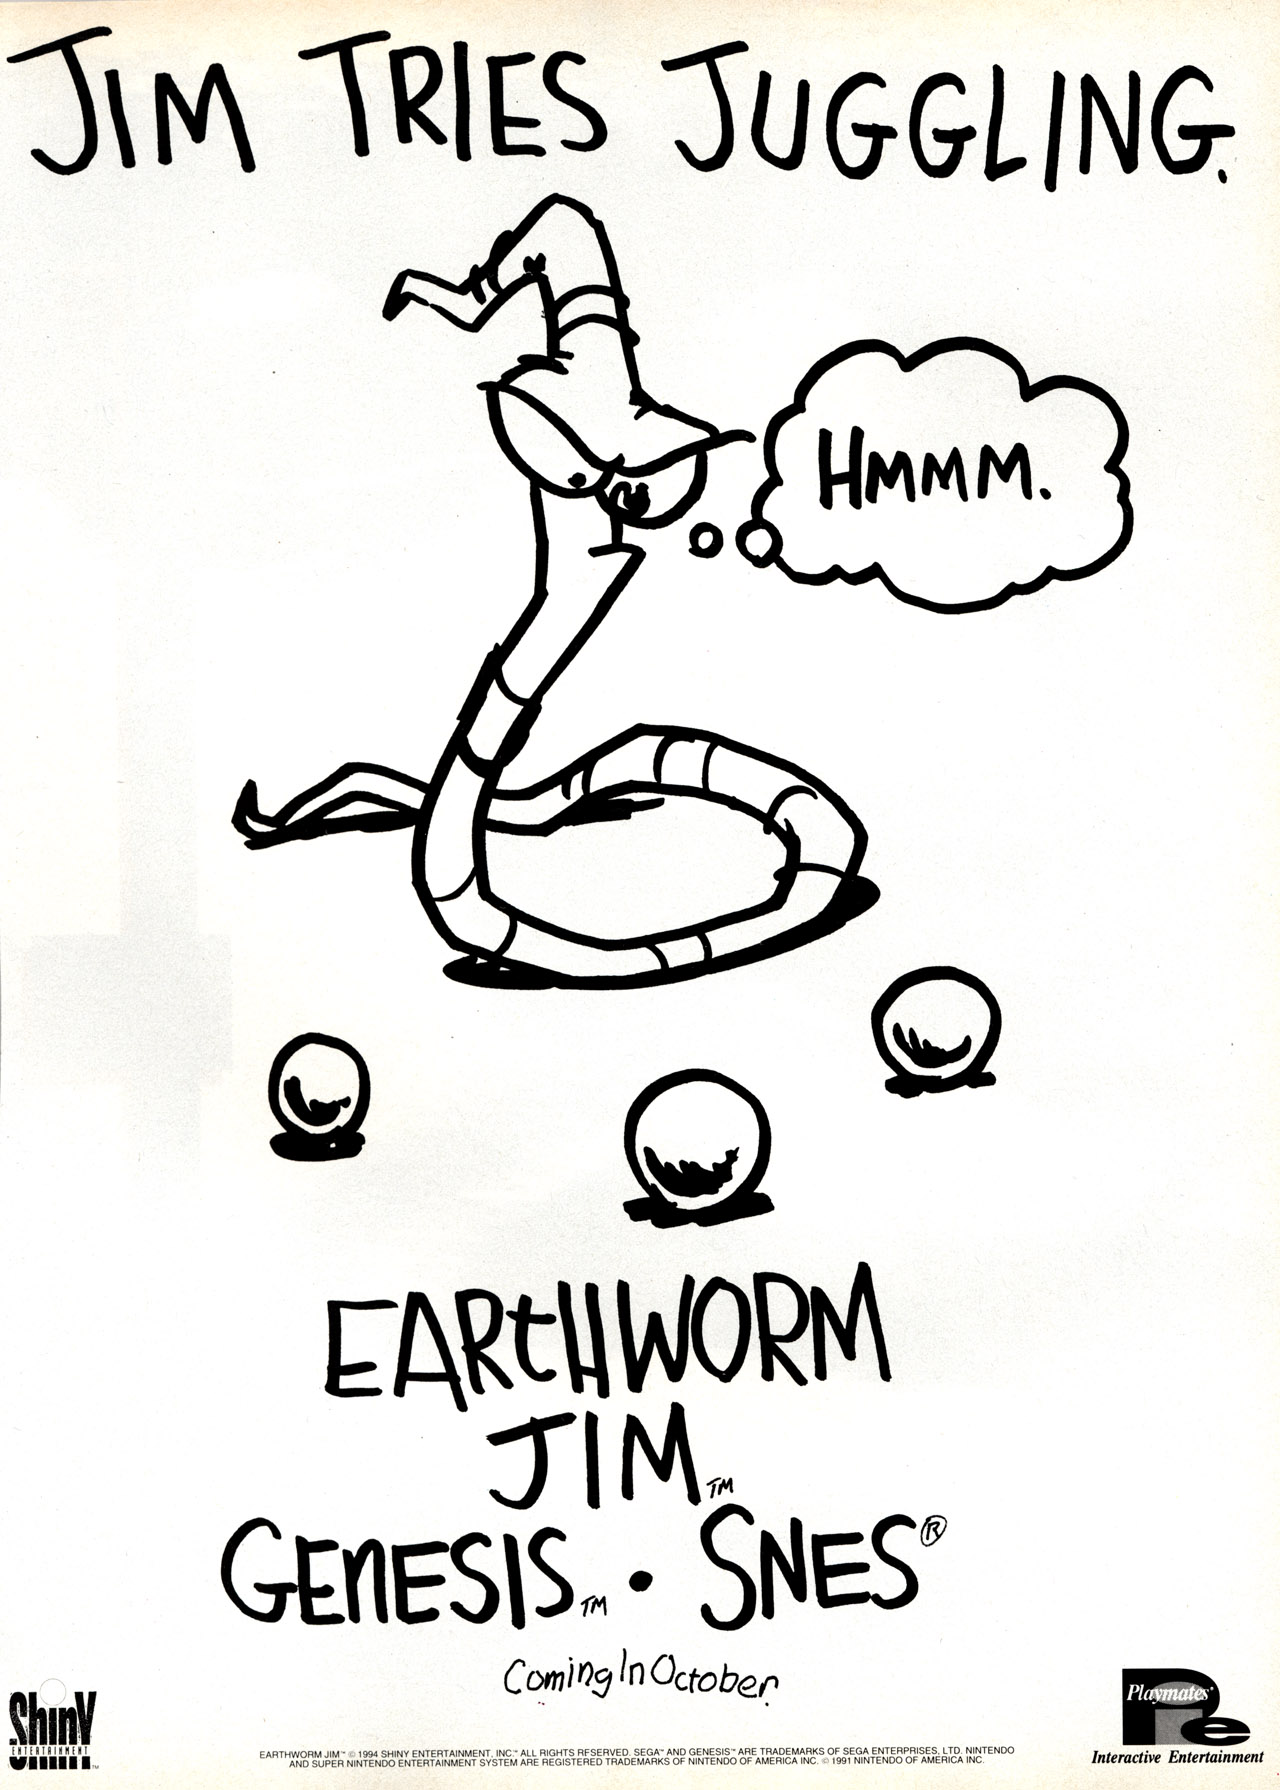 The first of many ads we’ll feature on this game, given its heavy marketing campaign; Click on the image for the full size ad Earthworm Jim was the first game […]